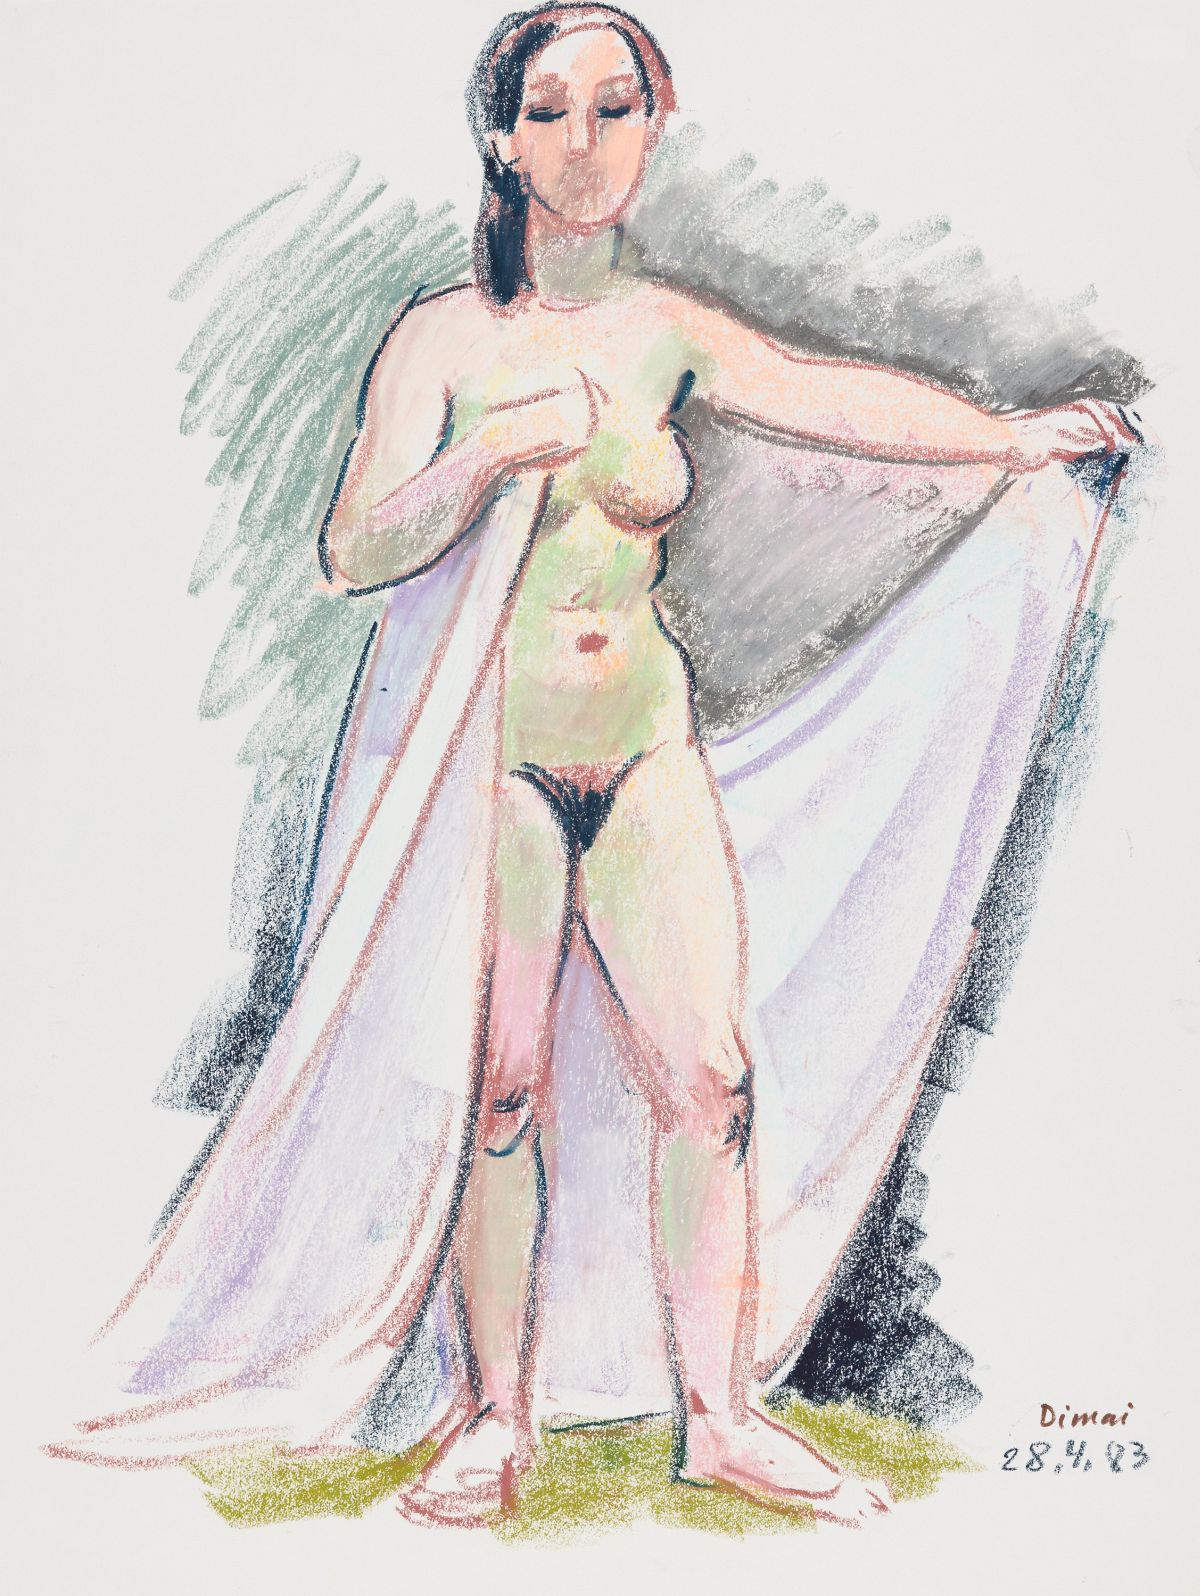 Dimai, Rudolf(1899 - 1986)Female Nude with Cloth, 28.4.1983pastels on papersigned and dated lower